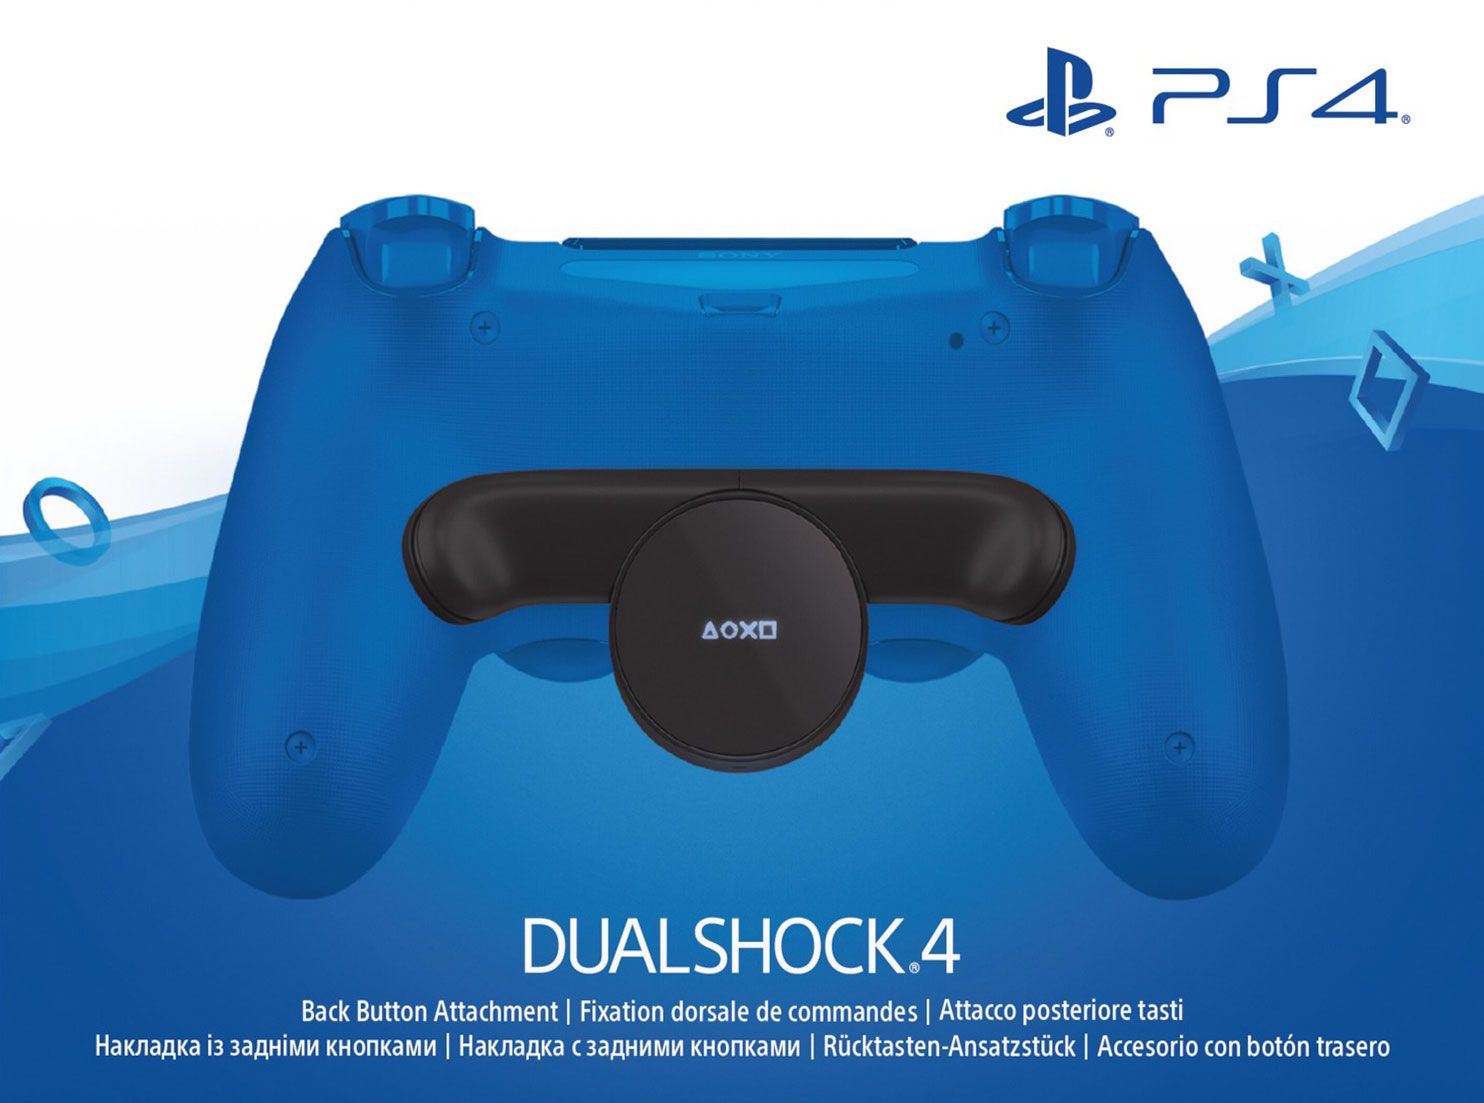 ps4 back button out of stock